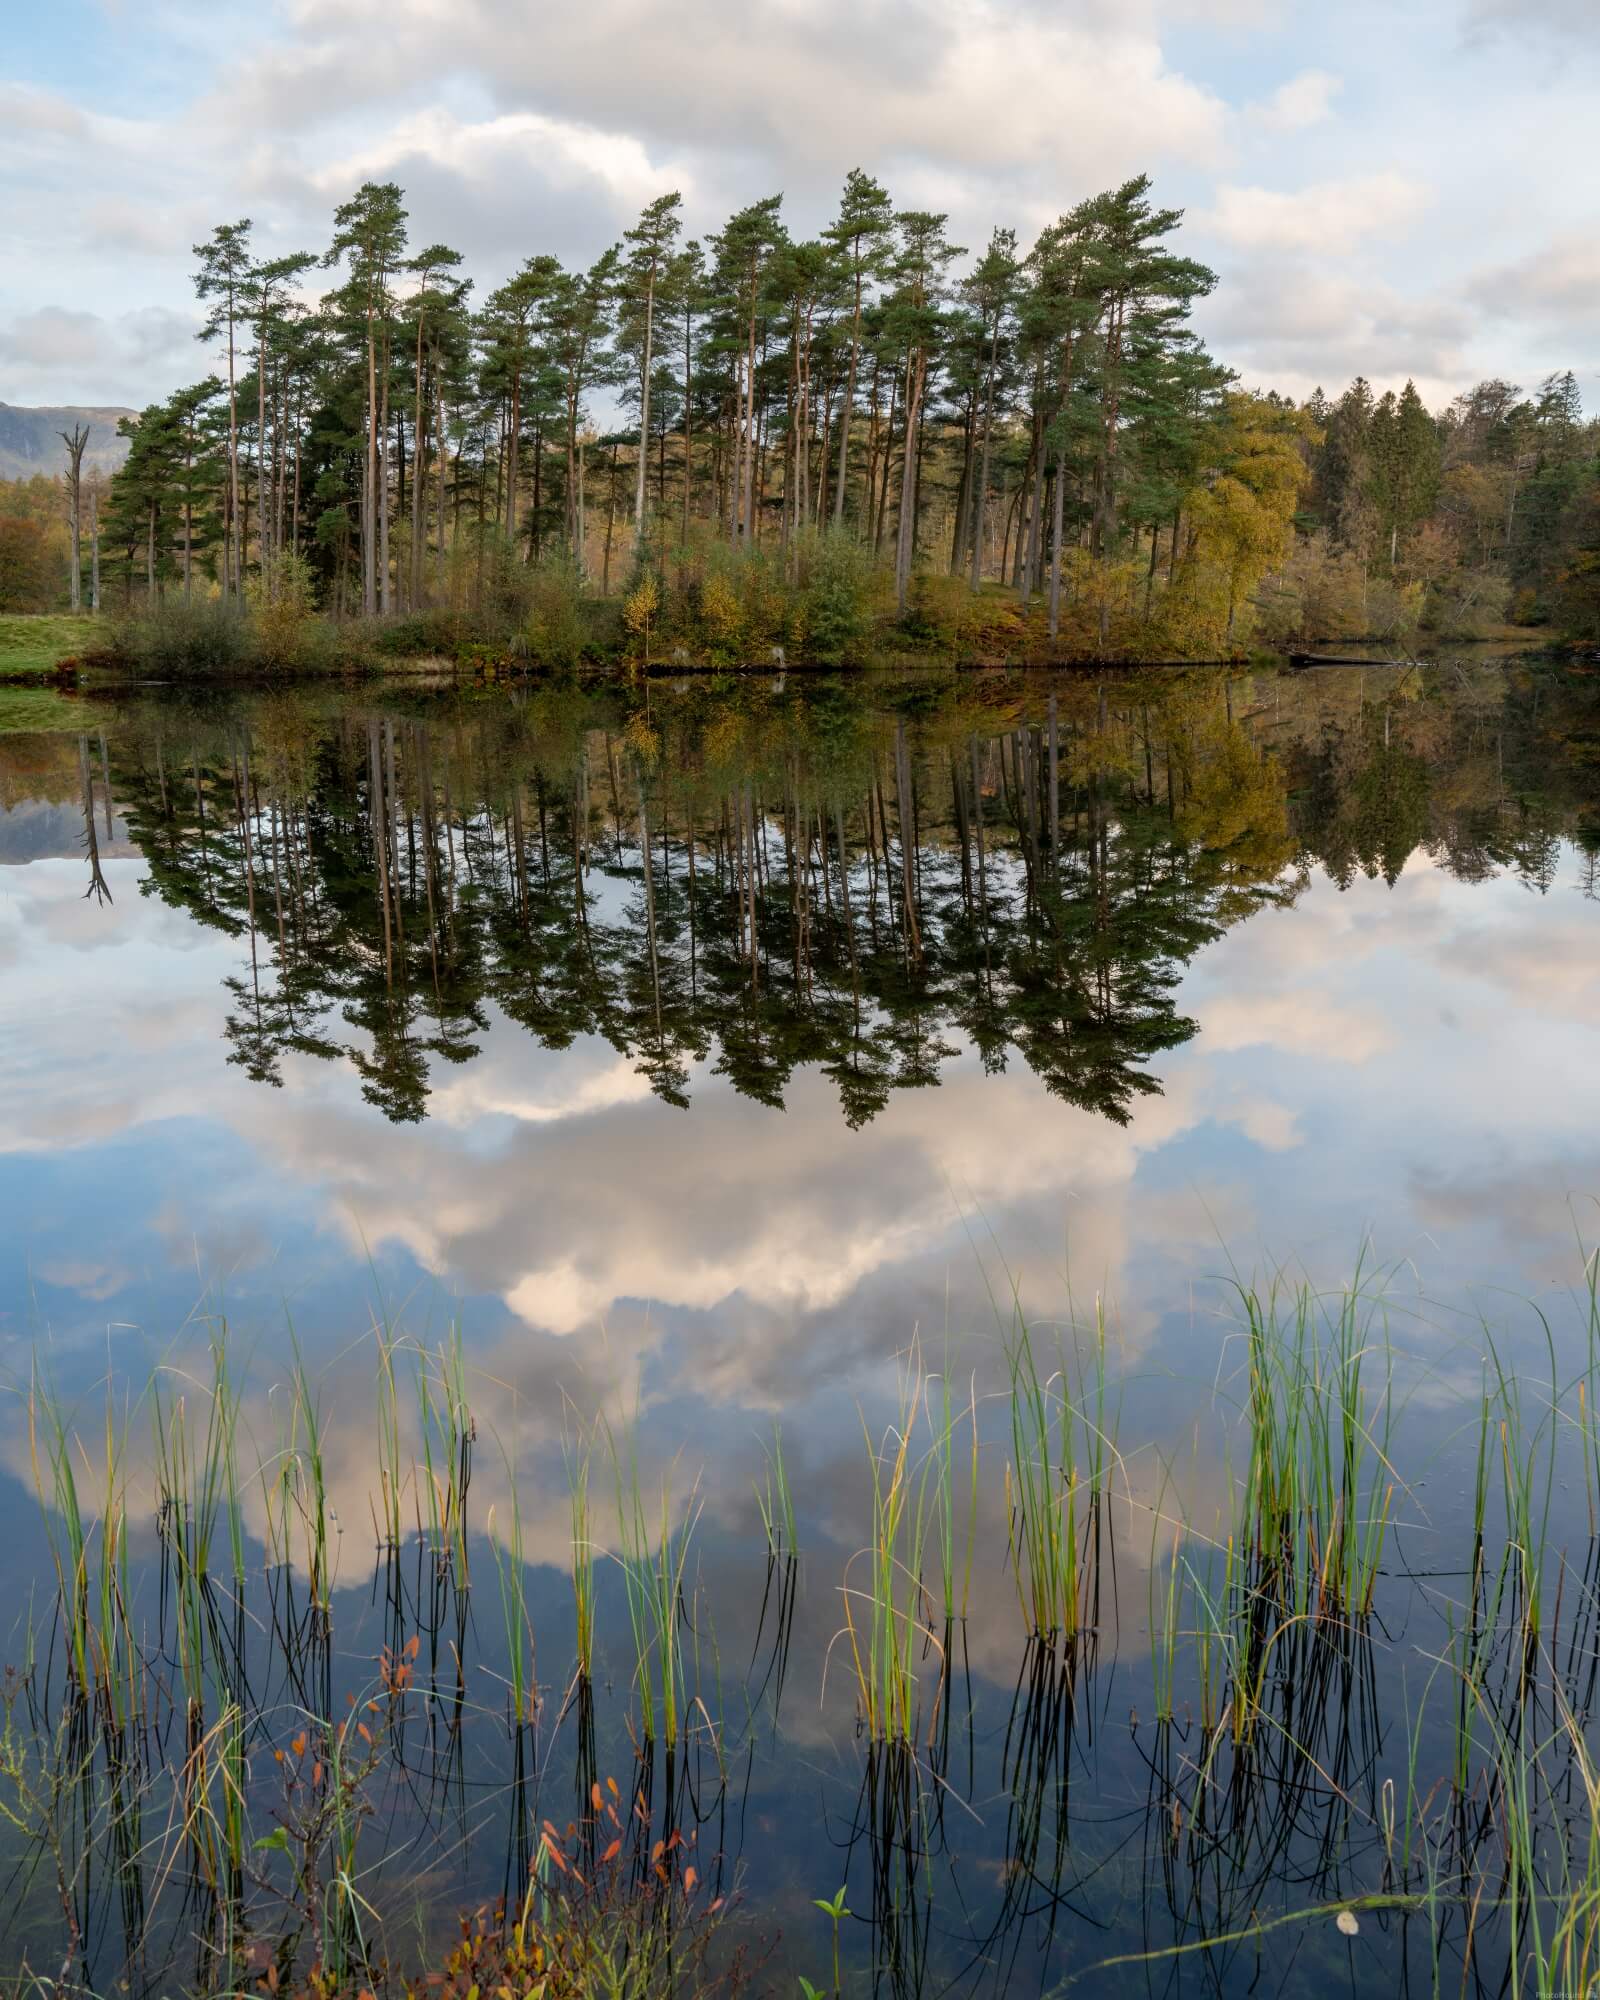 Image of Tarn Hows, Lake District by Oliver Sherratt